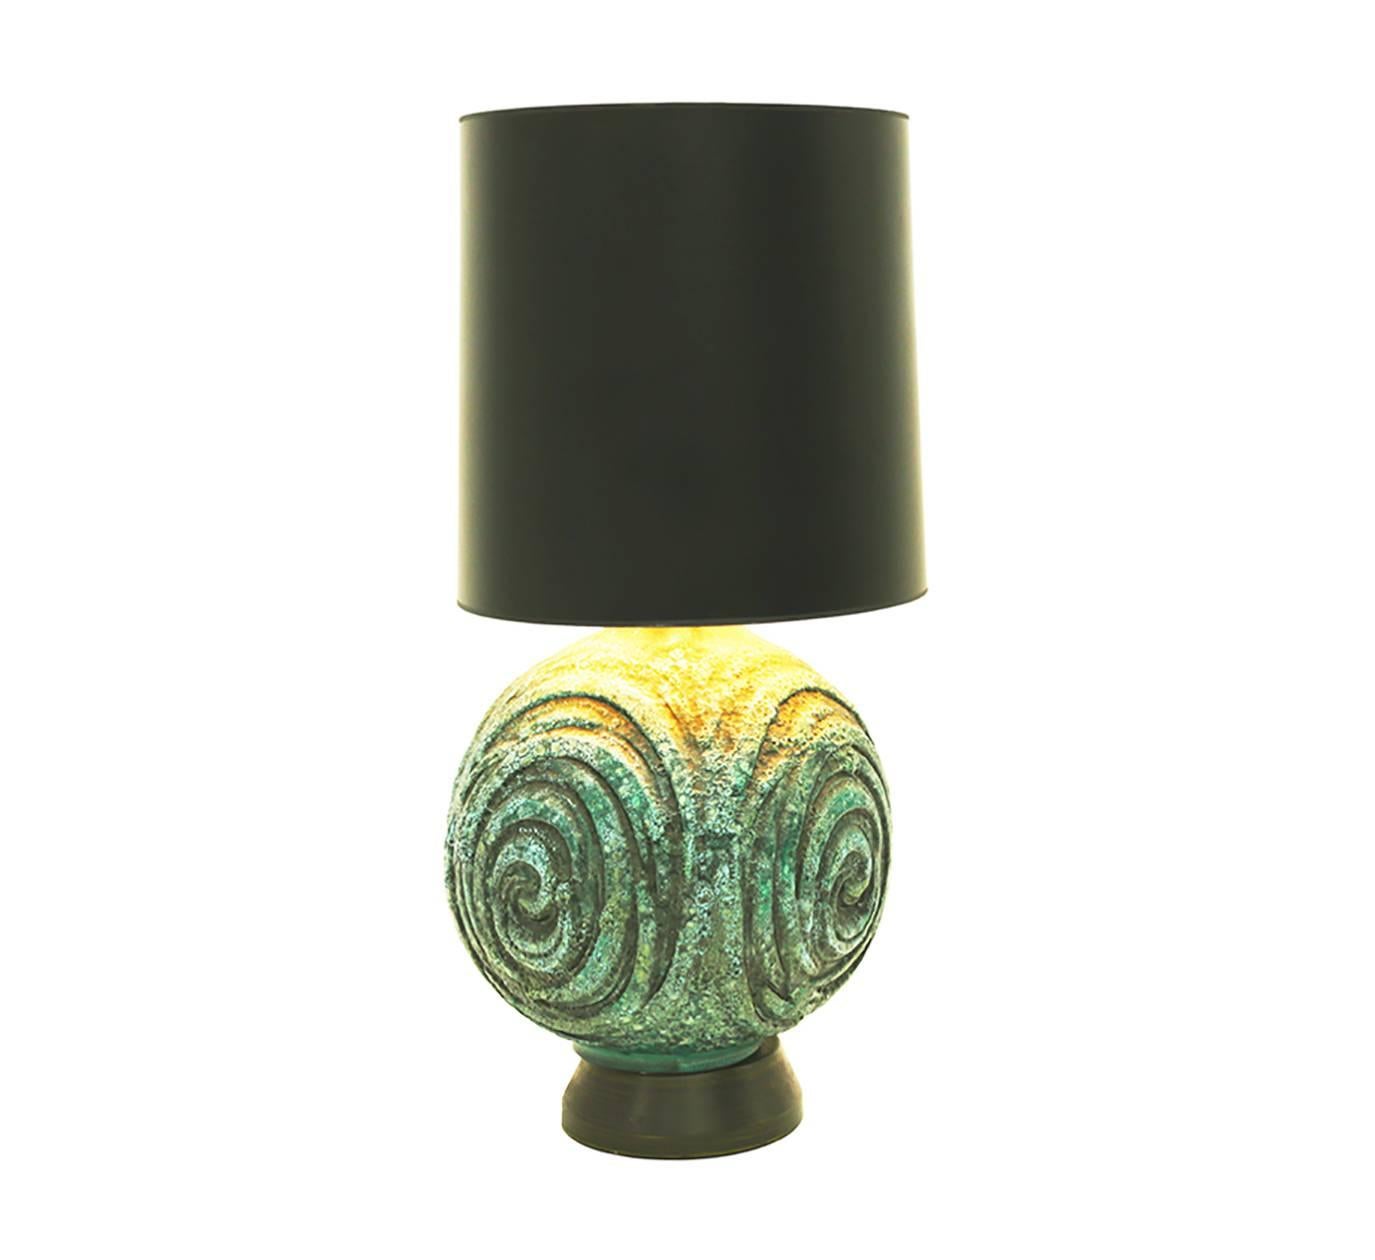 Vintage green ceramic Marcello Fantoni lamp with spiral pattern and metal base.
Shade not included.